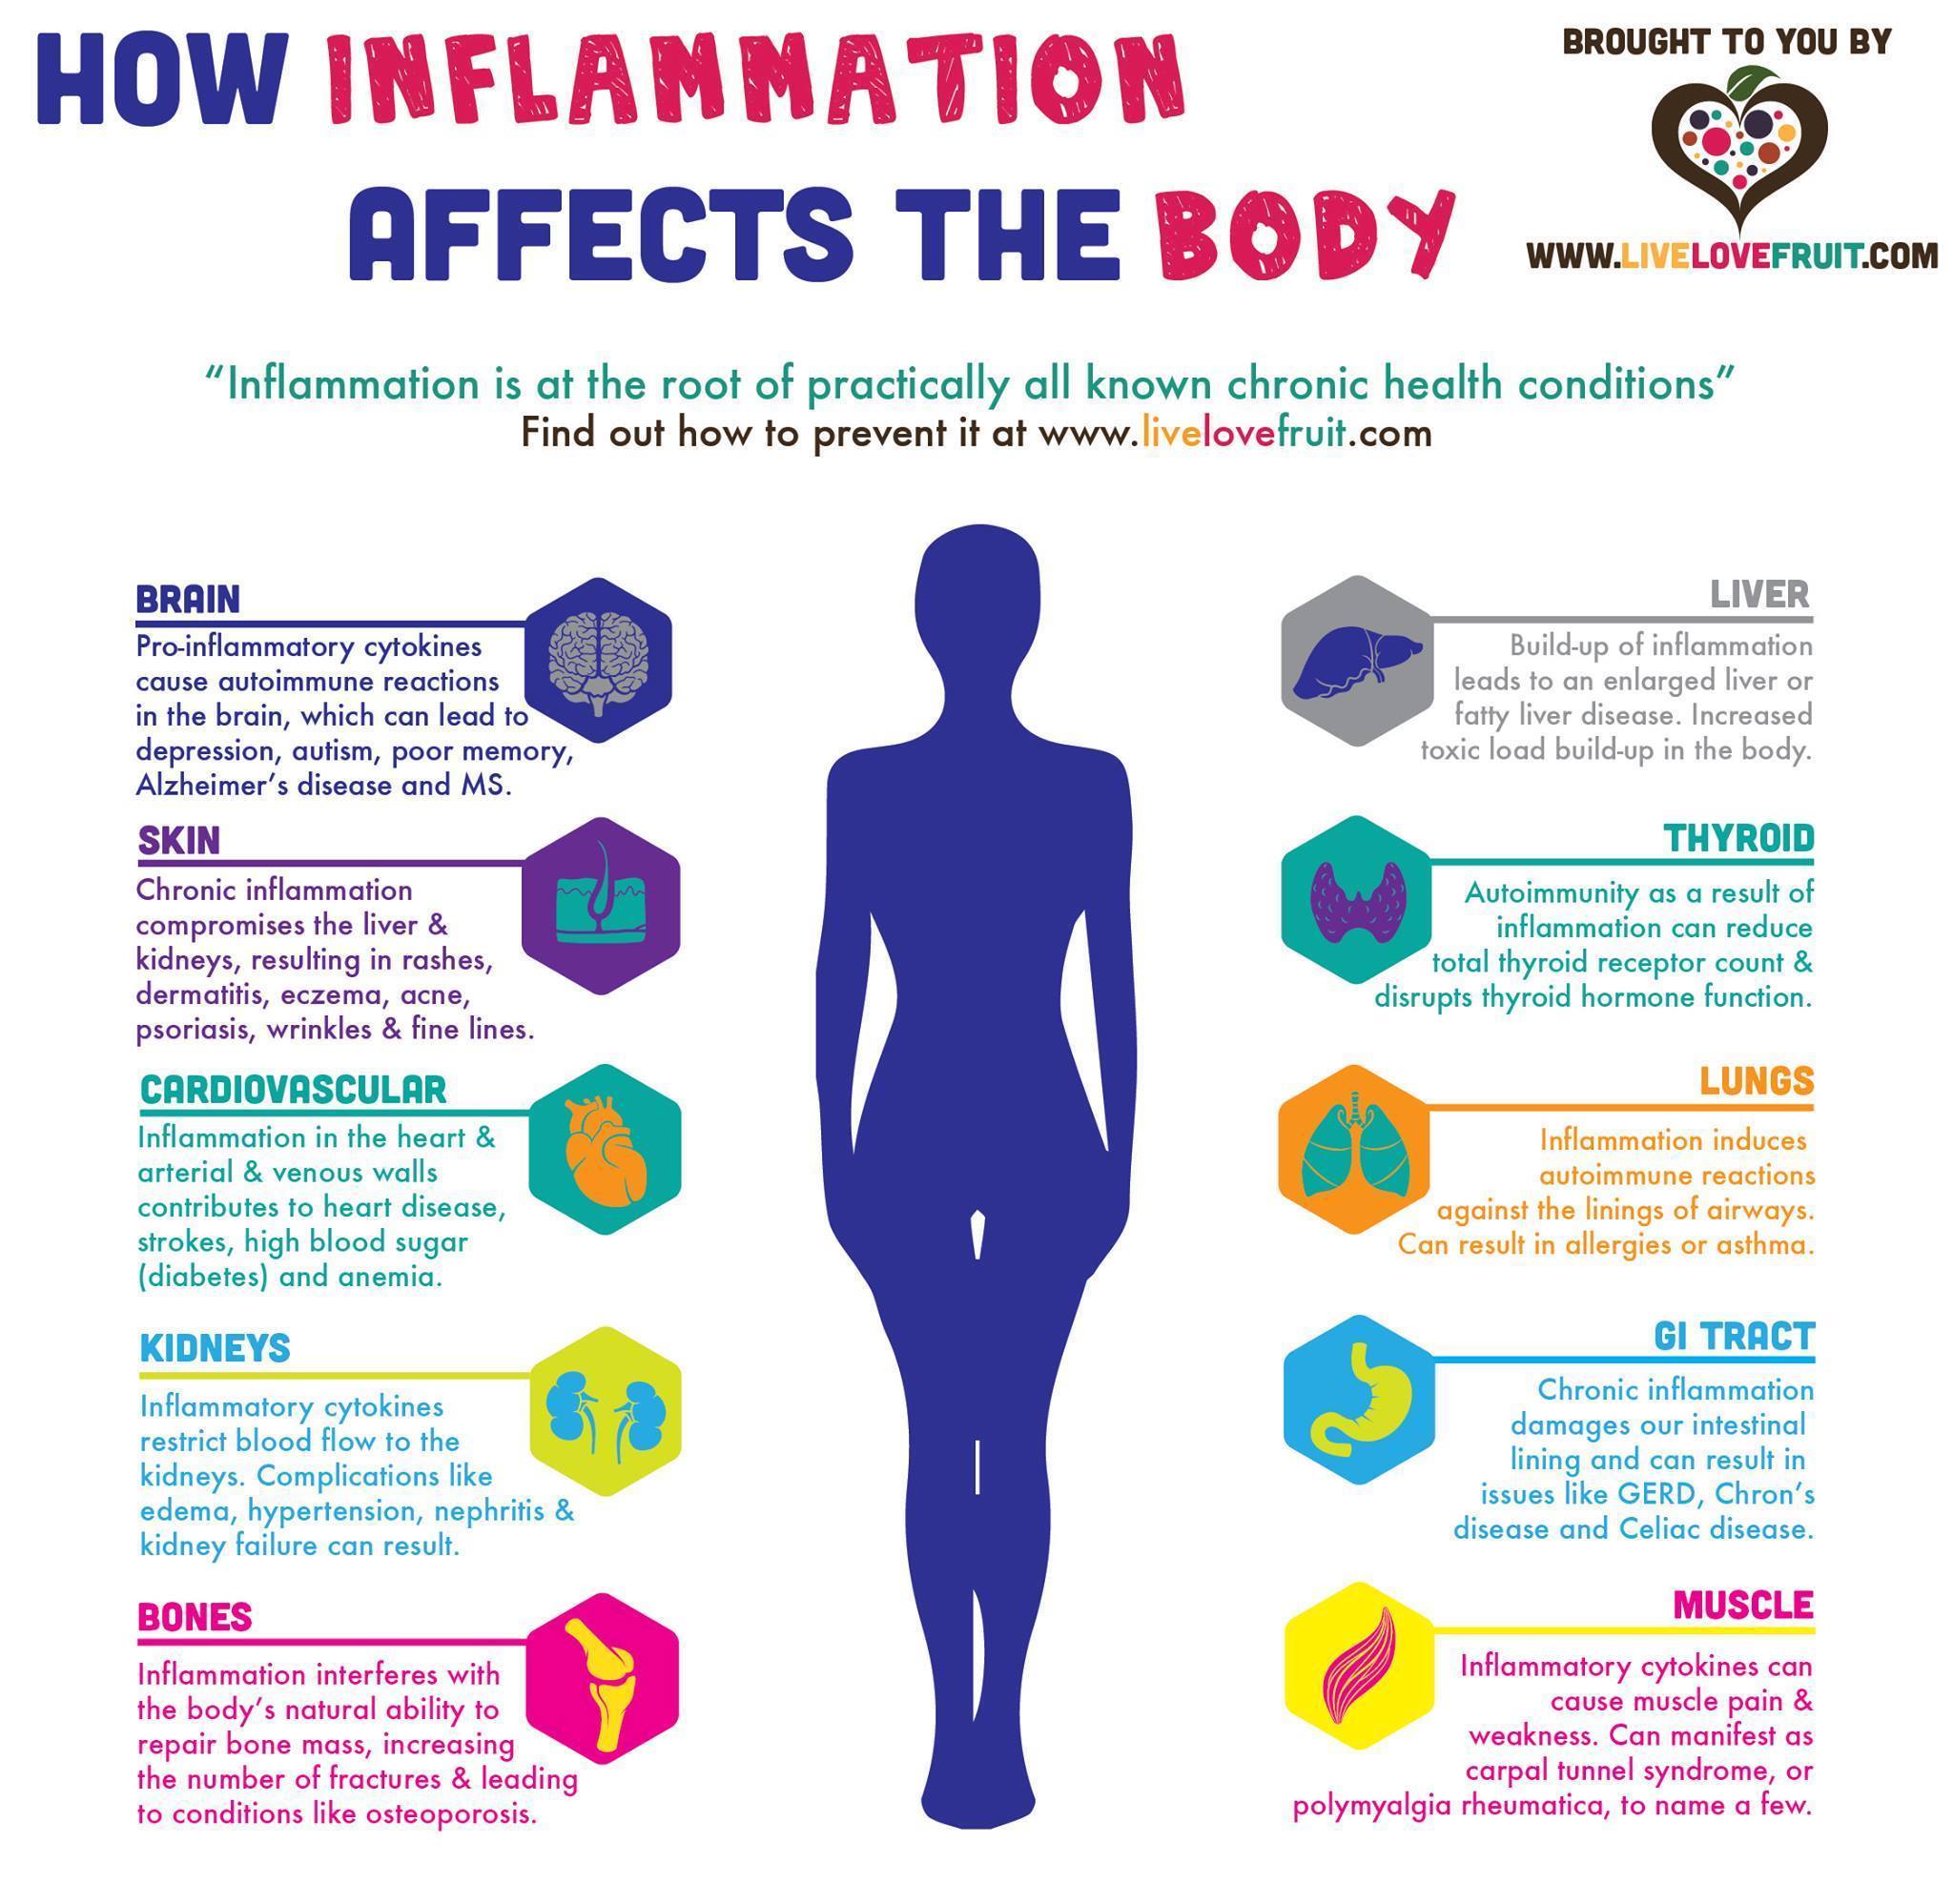 Inflammation and the Human Body